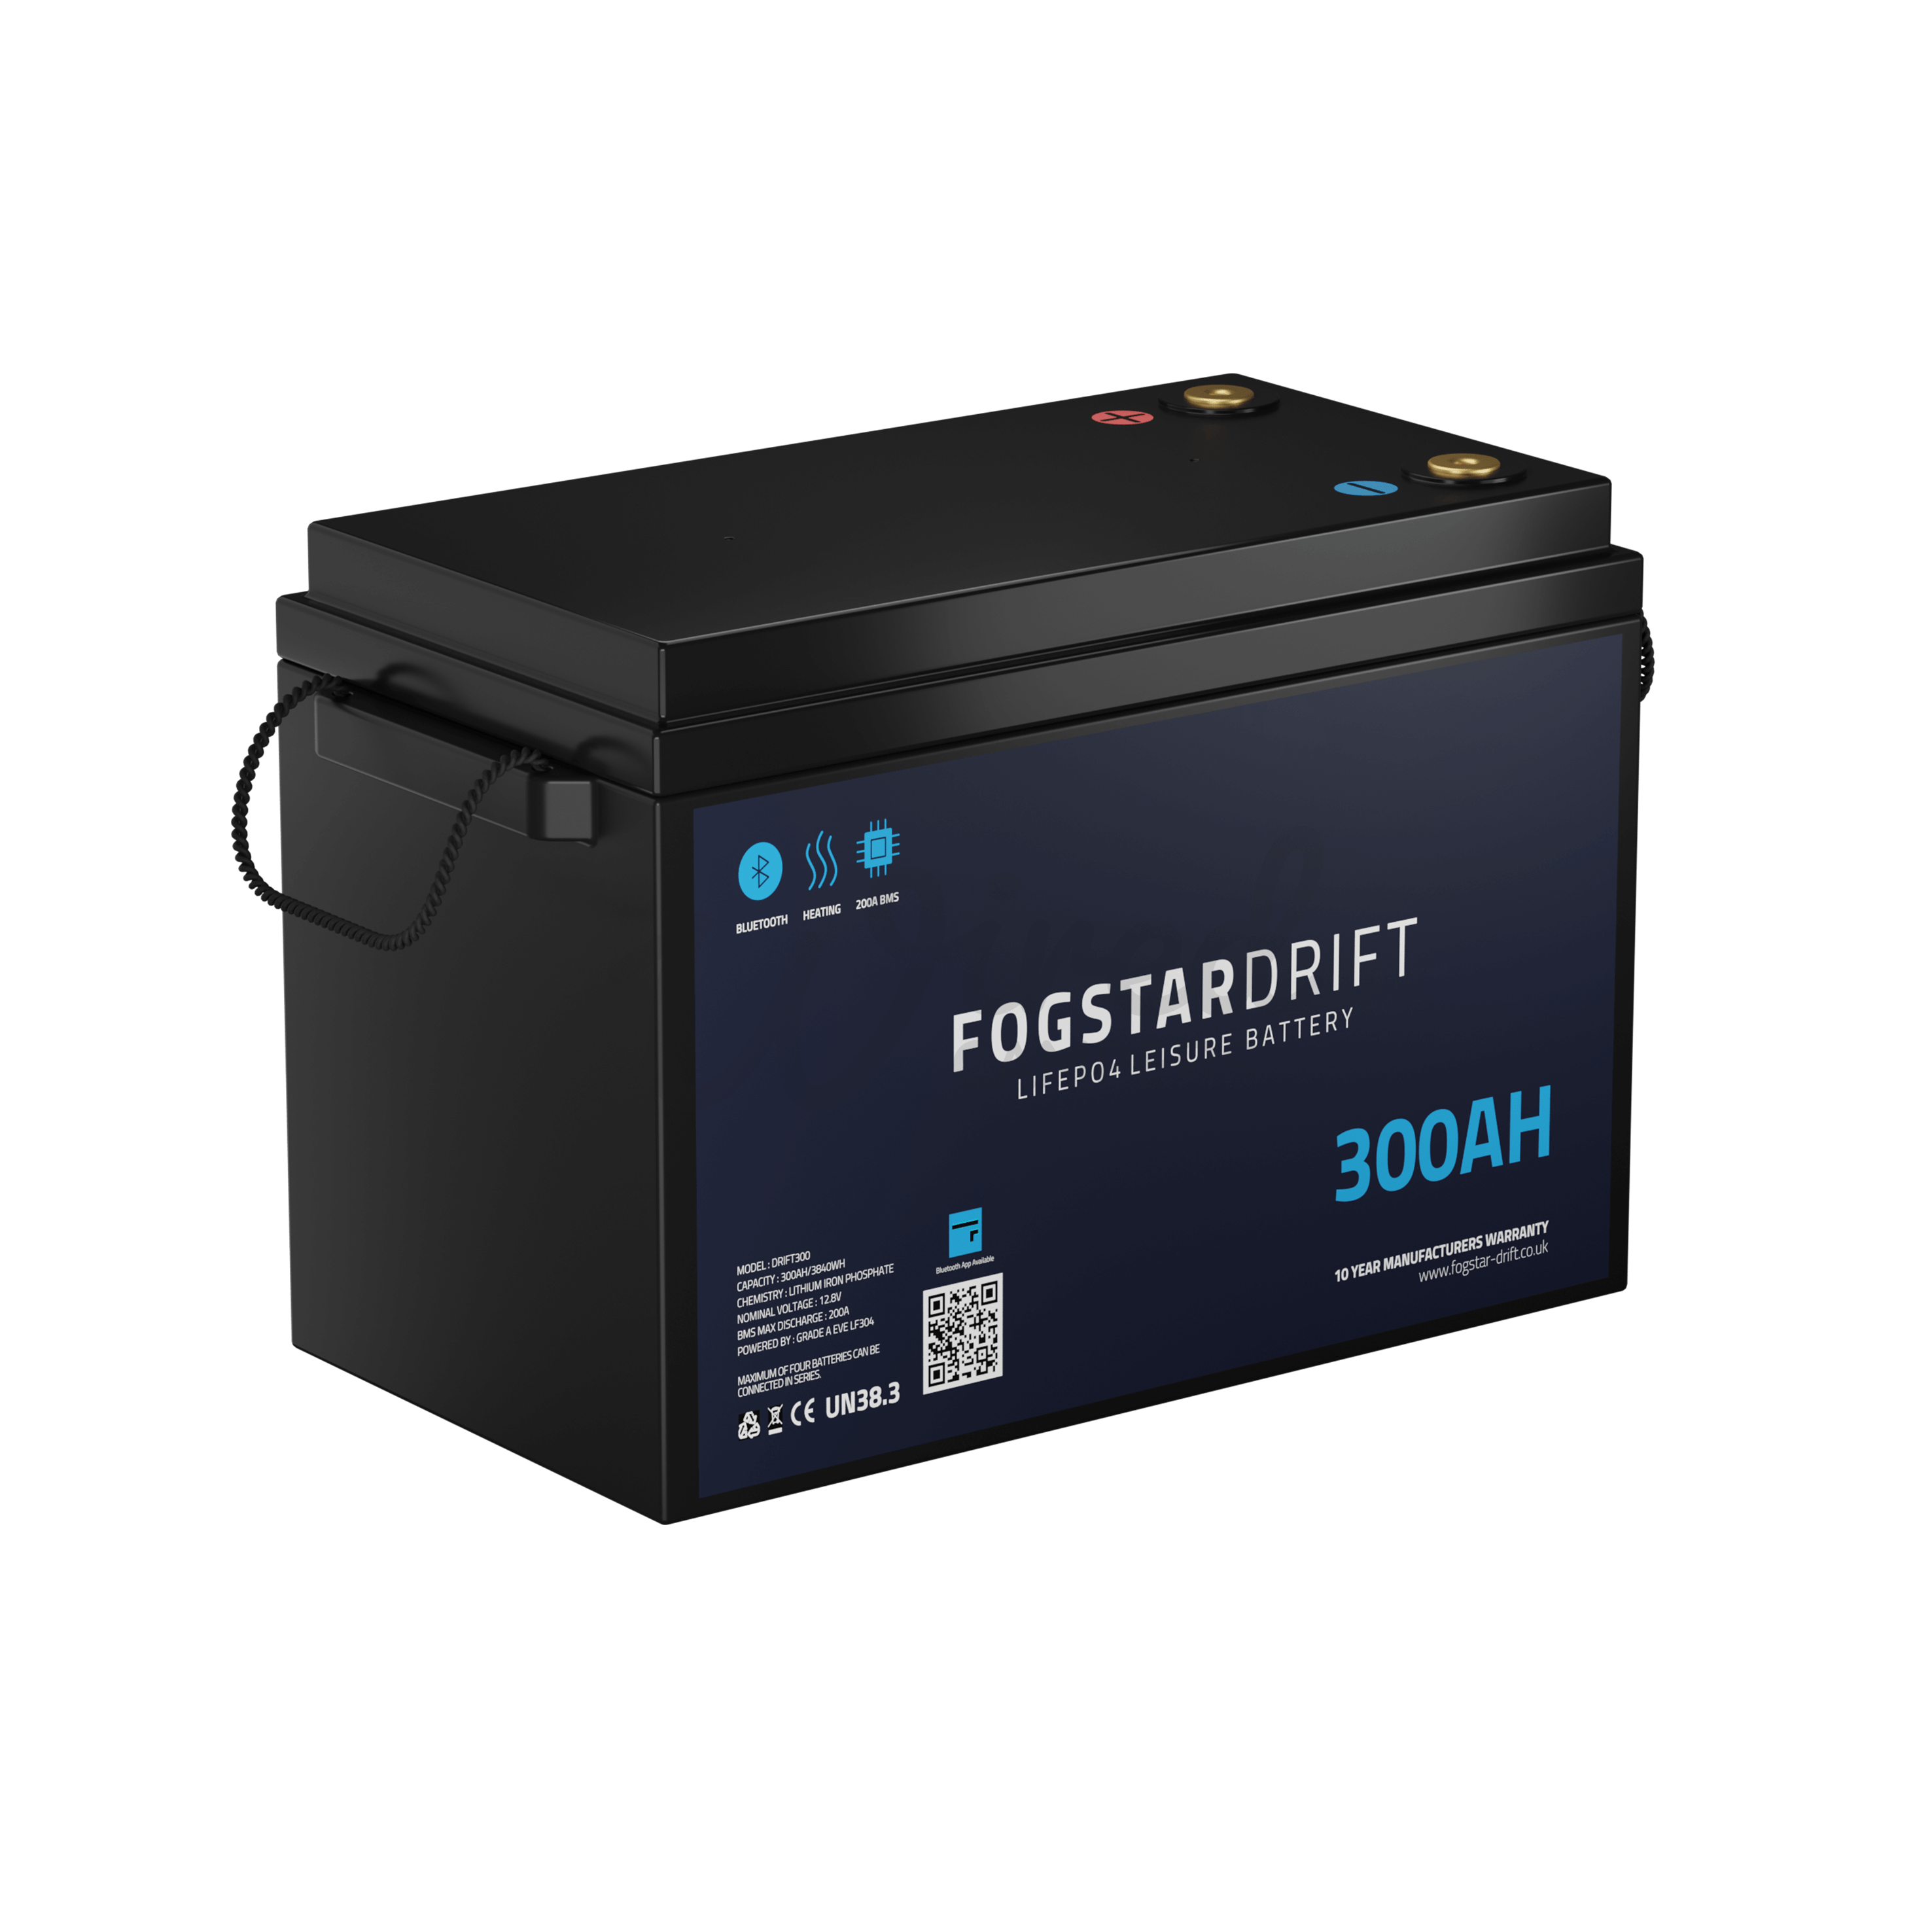 Wired Campers Limited Fogstar Drift 12V 300AH Heated Lithium LiFePO4 Leisure Battery